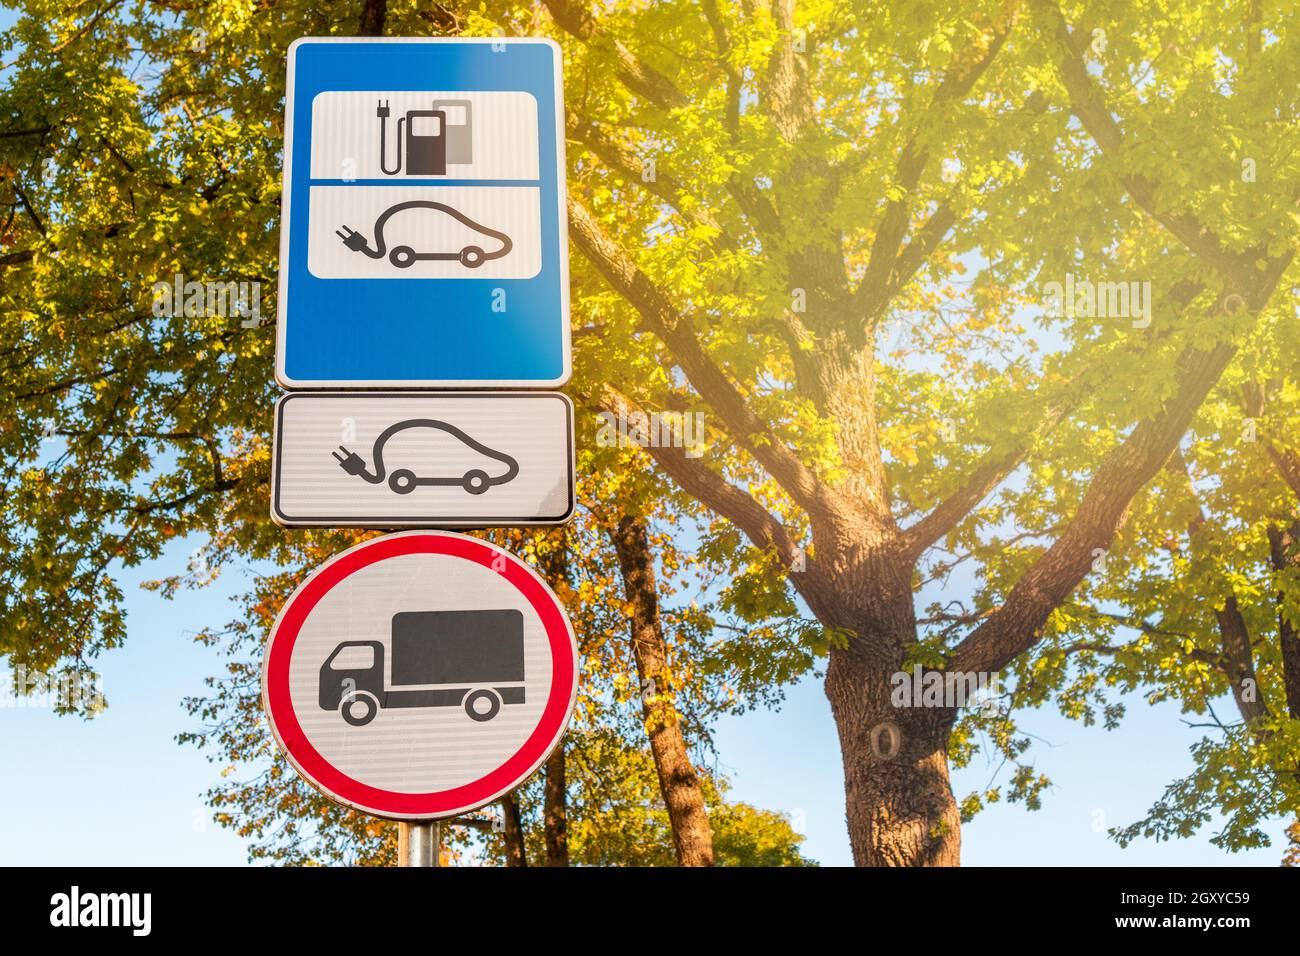 Parking for electric cars being charged. Recharging Point for Electric Vehicles Sign against nature background. Stock Photo